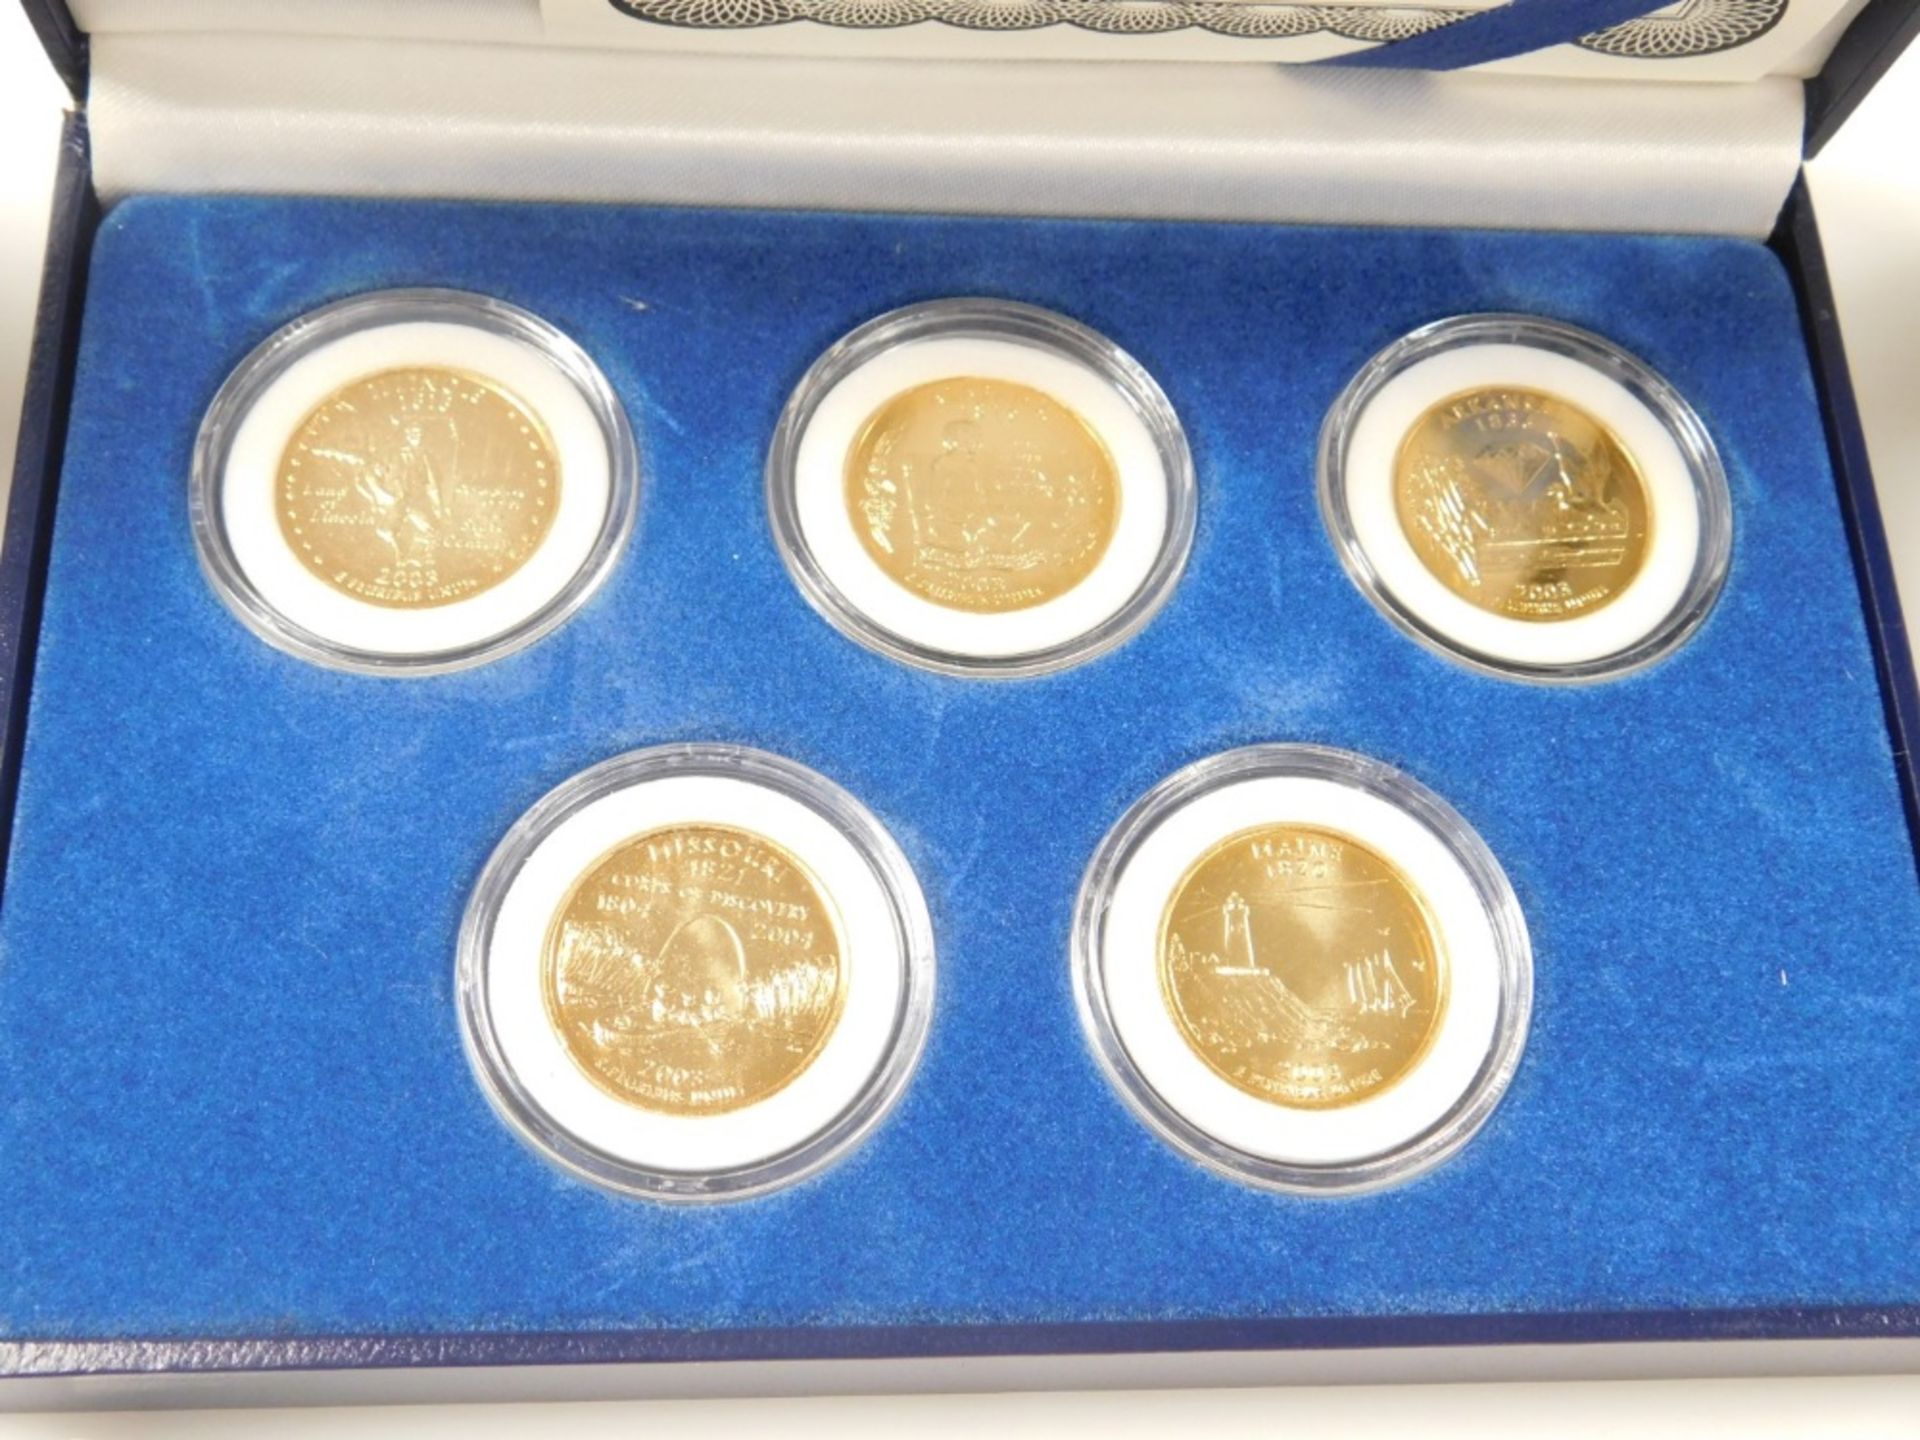 Five Statehood quarter dollars, the Morgan Mint, special edition, four sets, 2003, all boxed with ce - Image 4 of 6